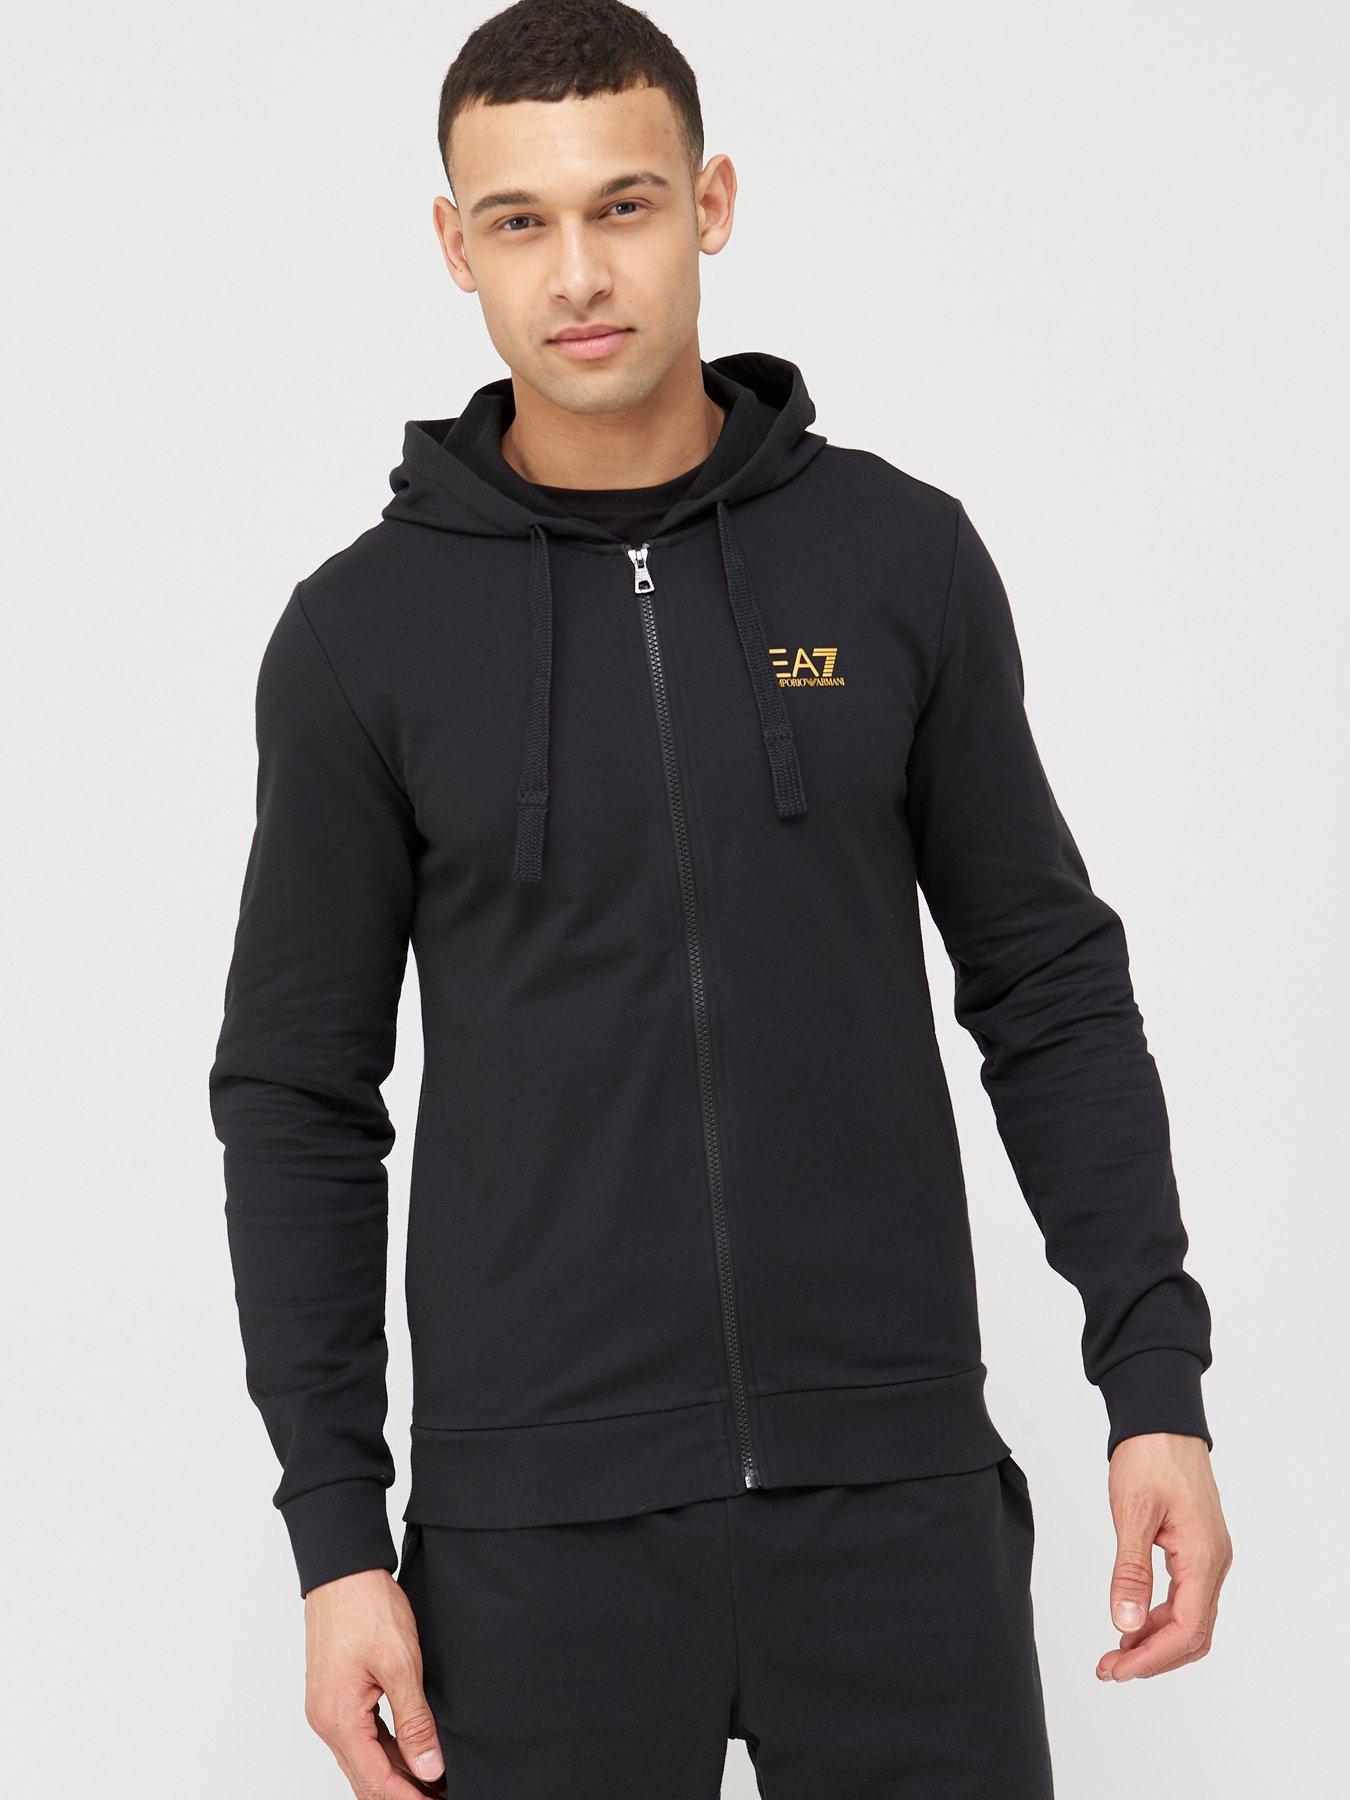 ea7 black and gold tracksuit